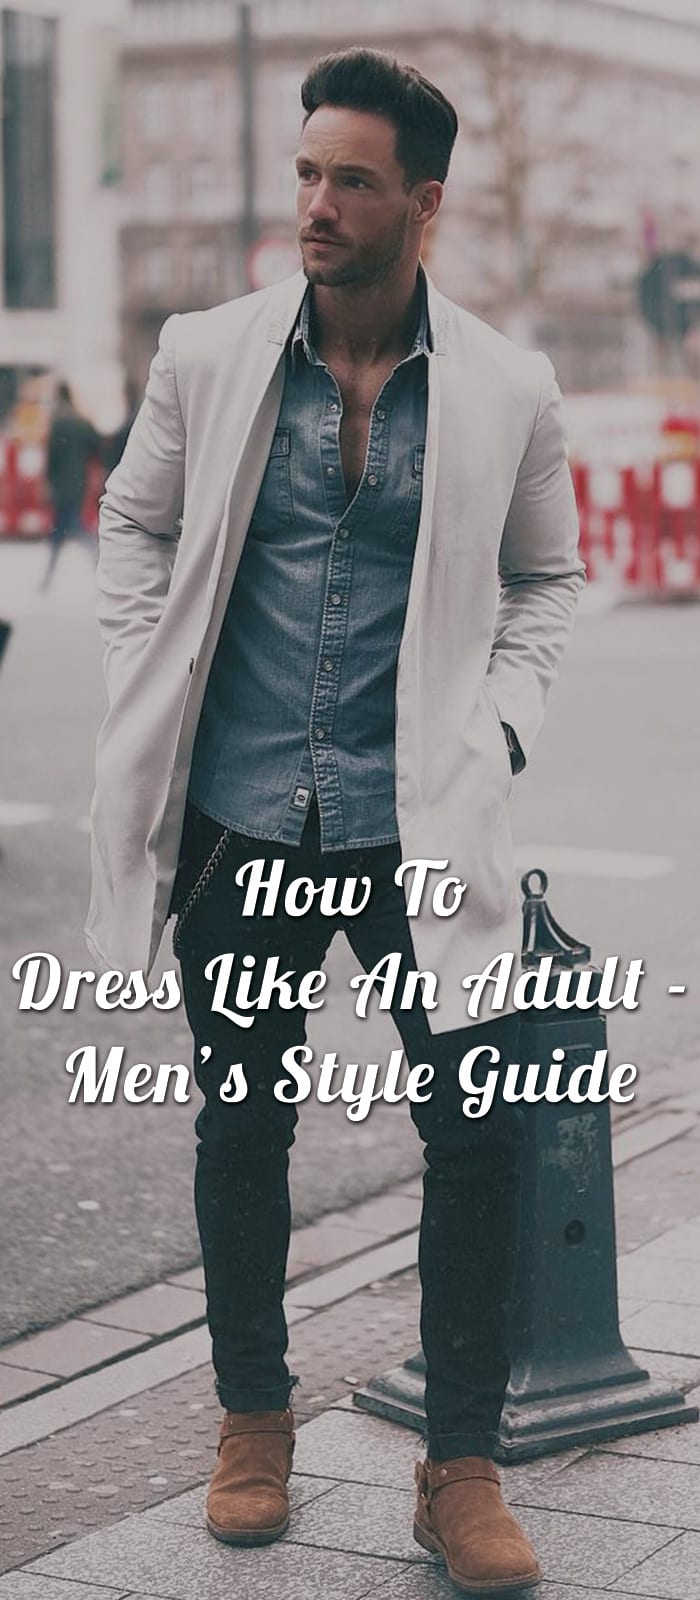 How To Dress Like An Adult - Men’s Style Guide